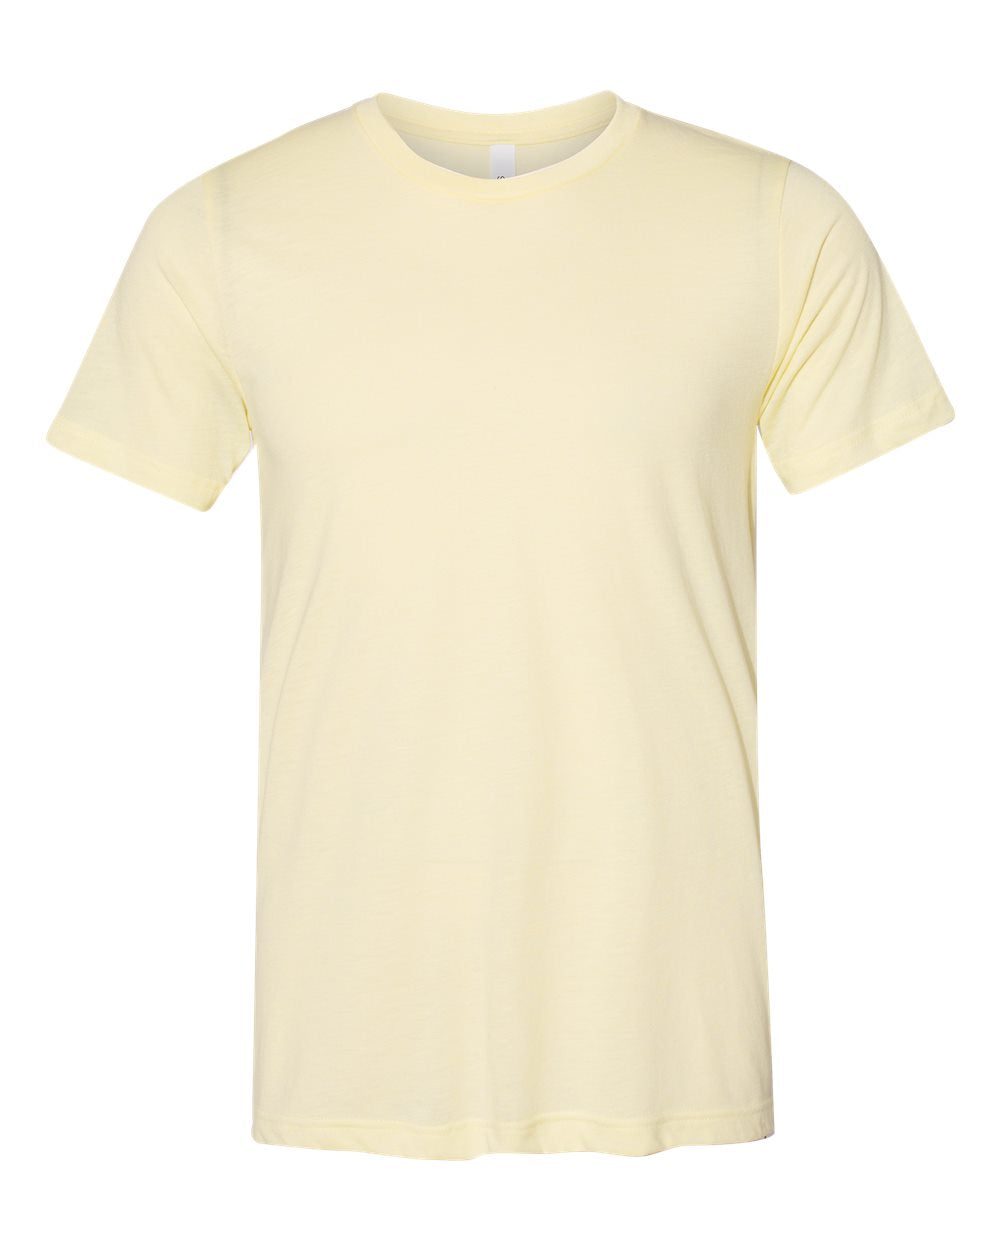 Bella + Canvas Triblend Tee (3413) in Pale Yellow Triblend